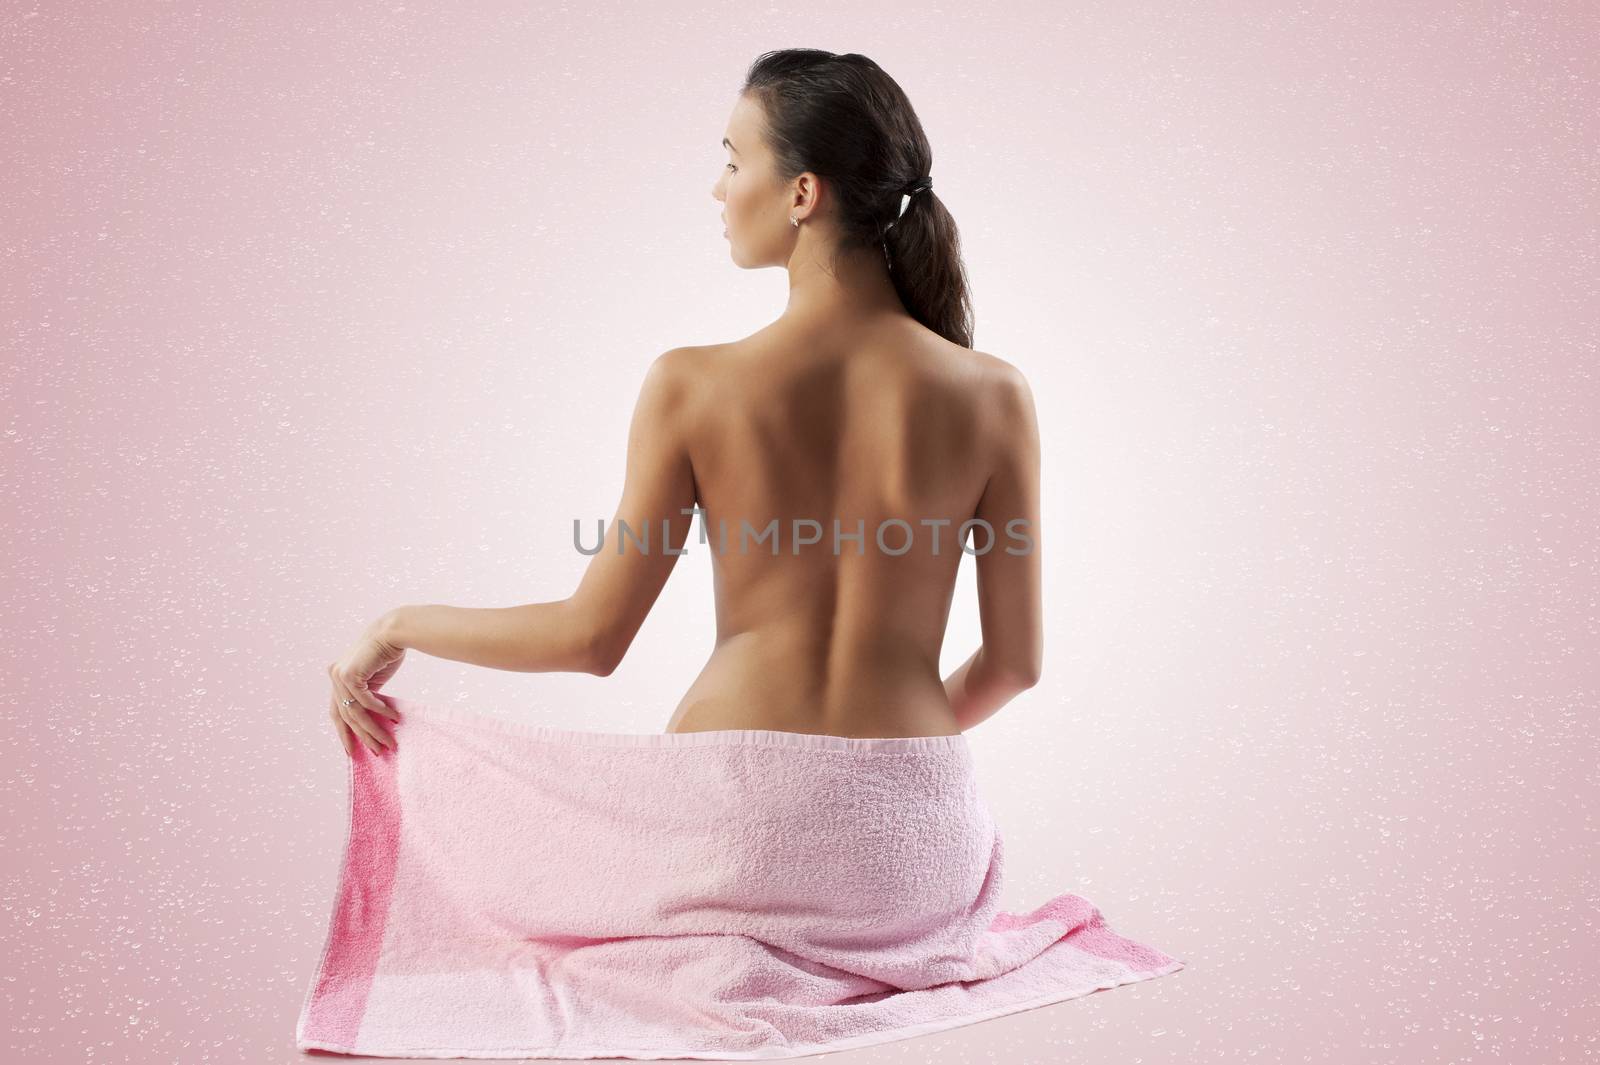 naked brunette showing her back shoulder and covering her body with a pink towel